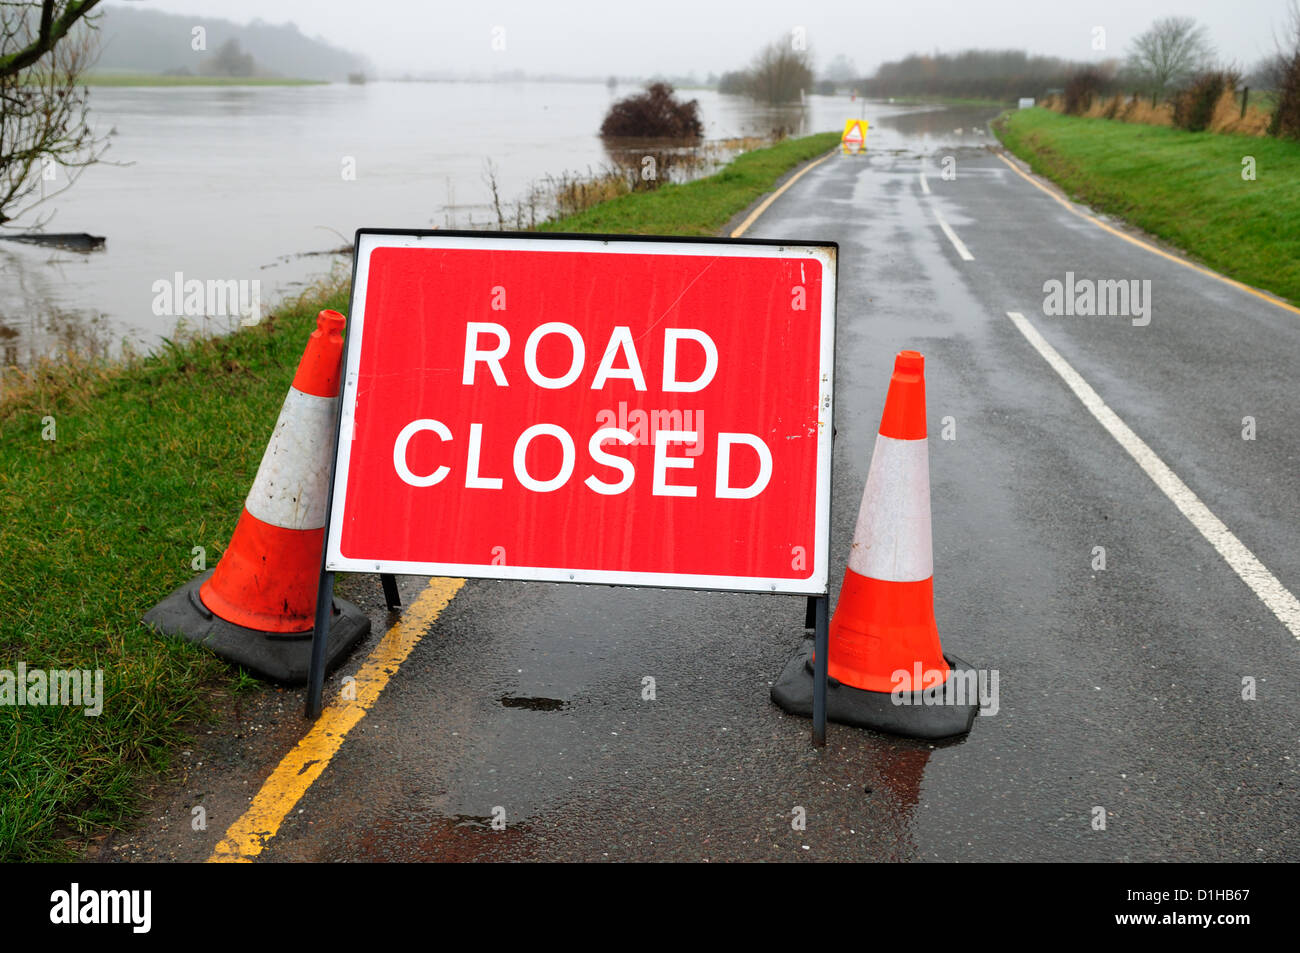 22nd December 2012. The River Trent burst its Banks and causes road closures in Hoveringham, UK. Stock Photo